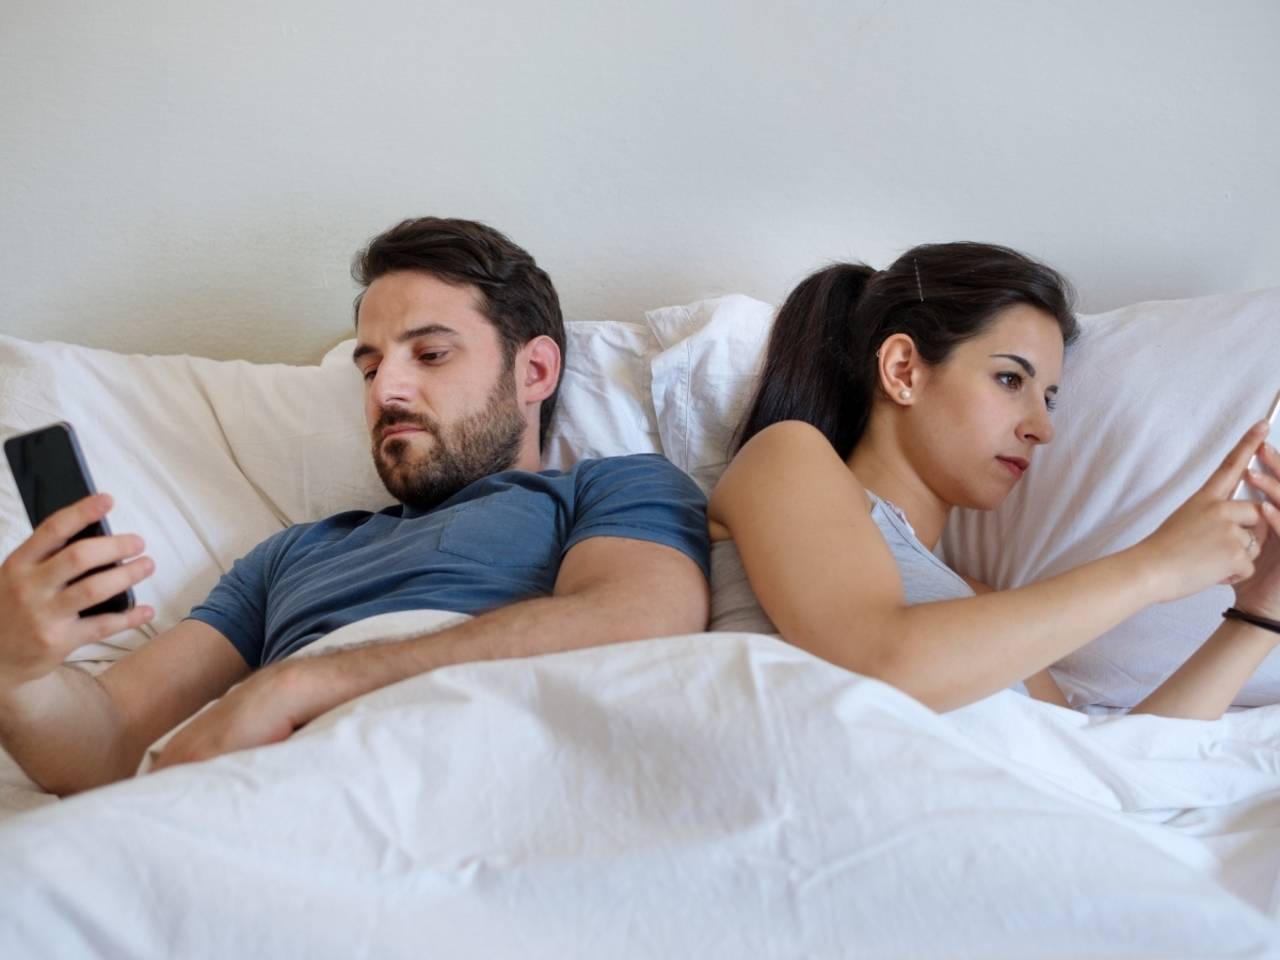 Why do couples face boredom during sex?